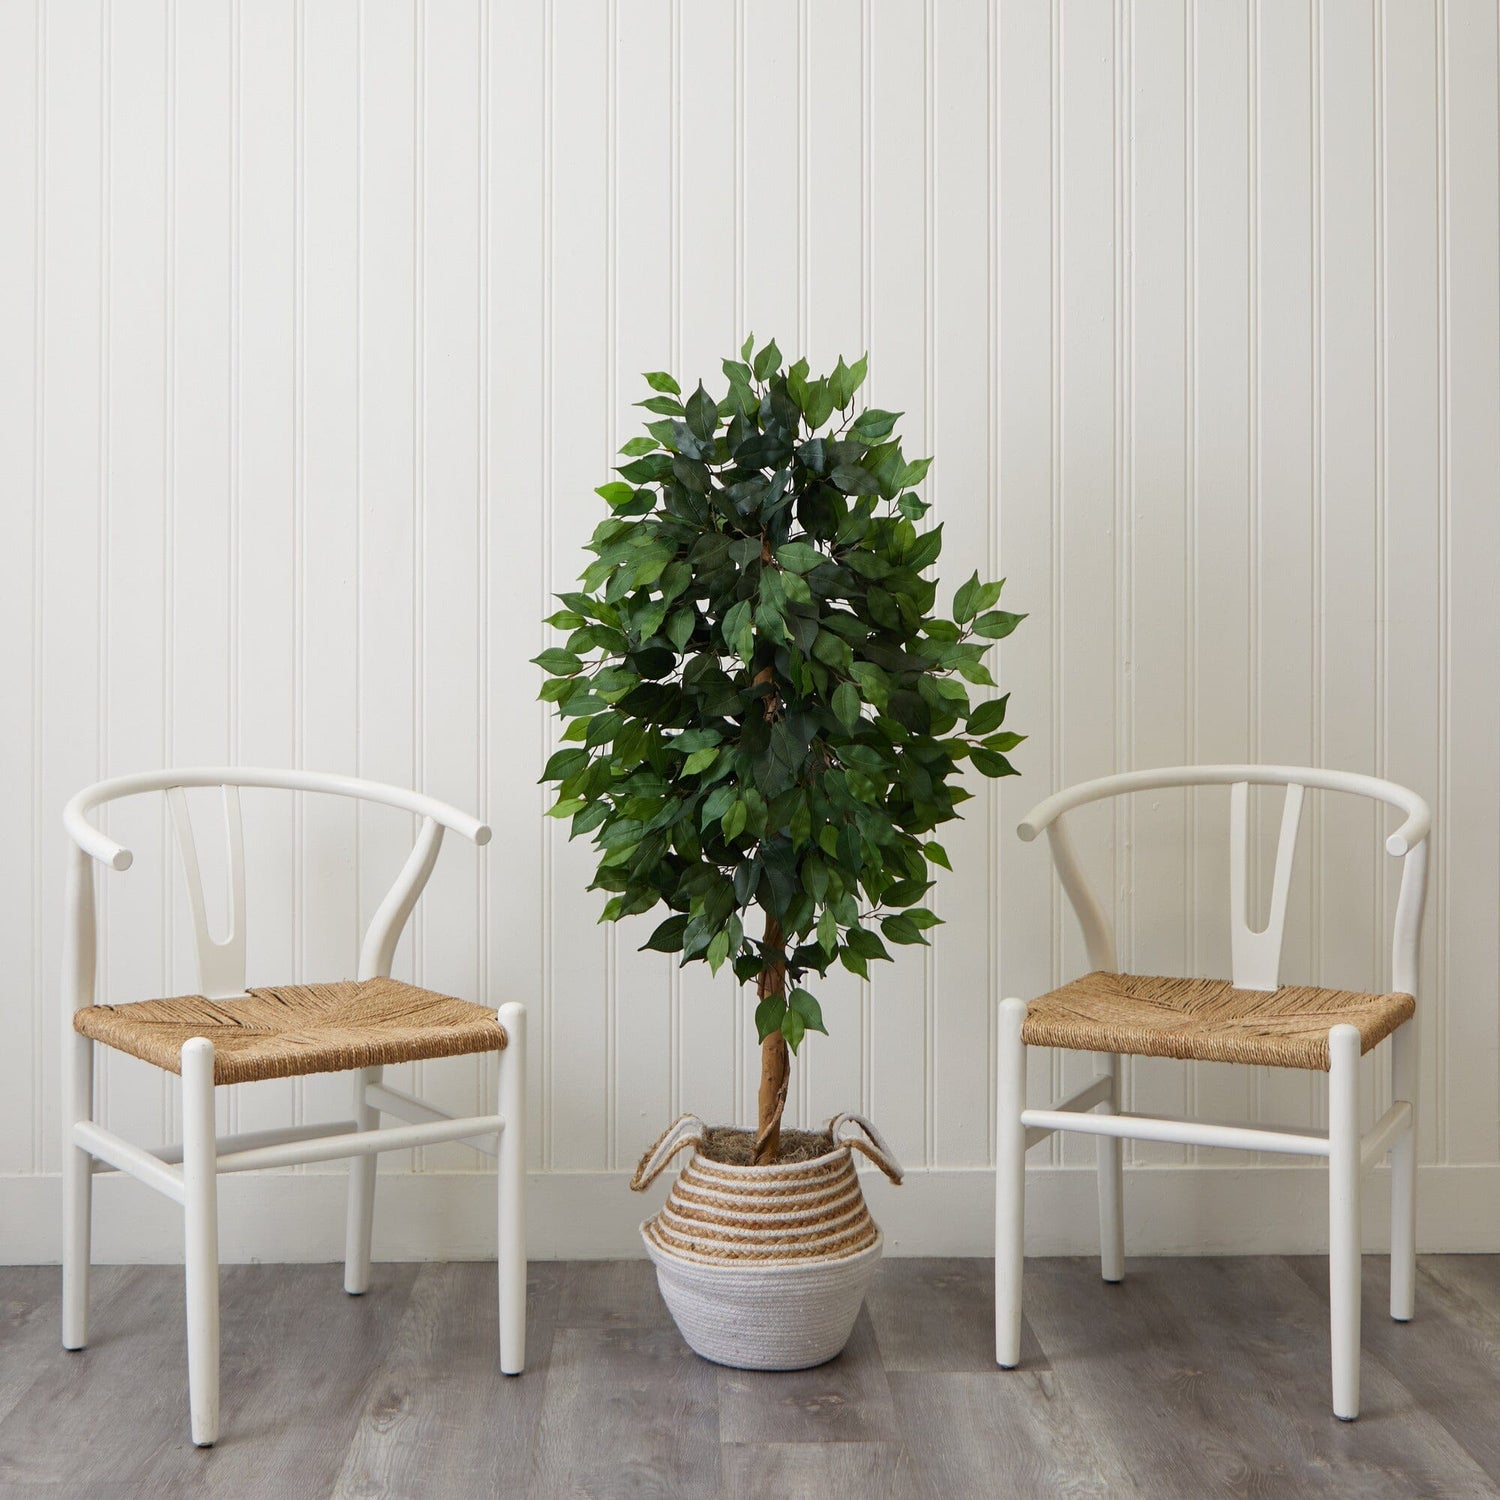 4.5' Artificial Ficus Tree with Double Trunk in a Handmade Cotton & Jute Basket DIY KIT